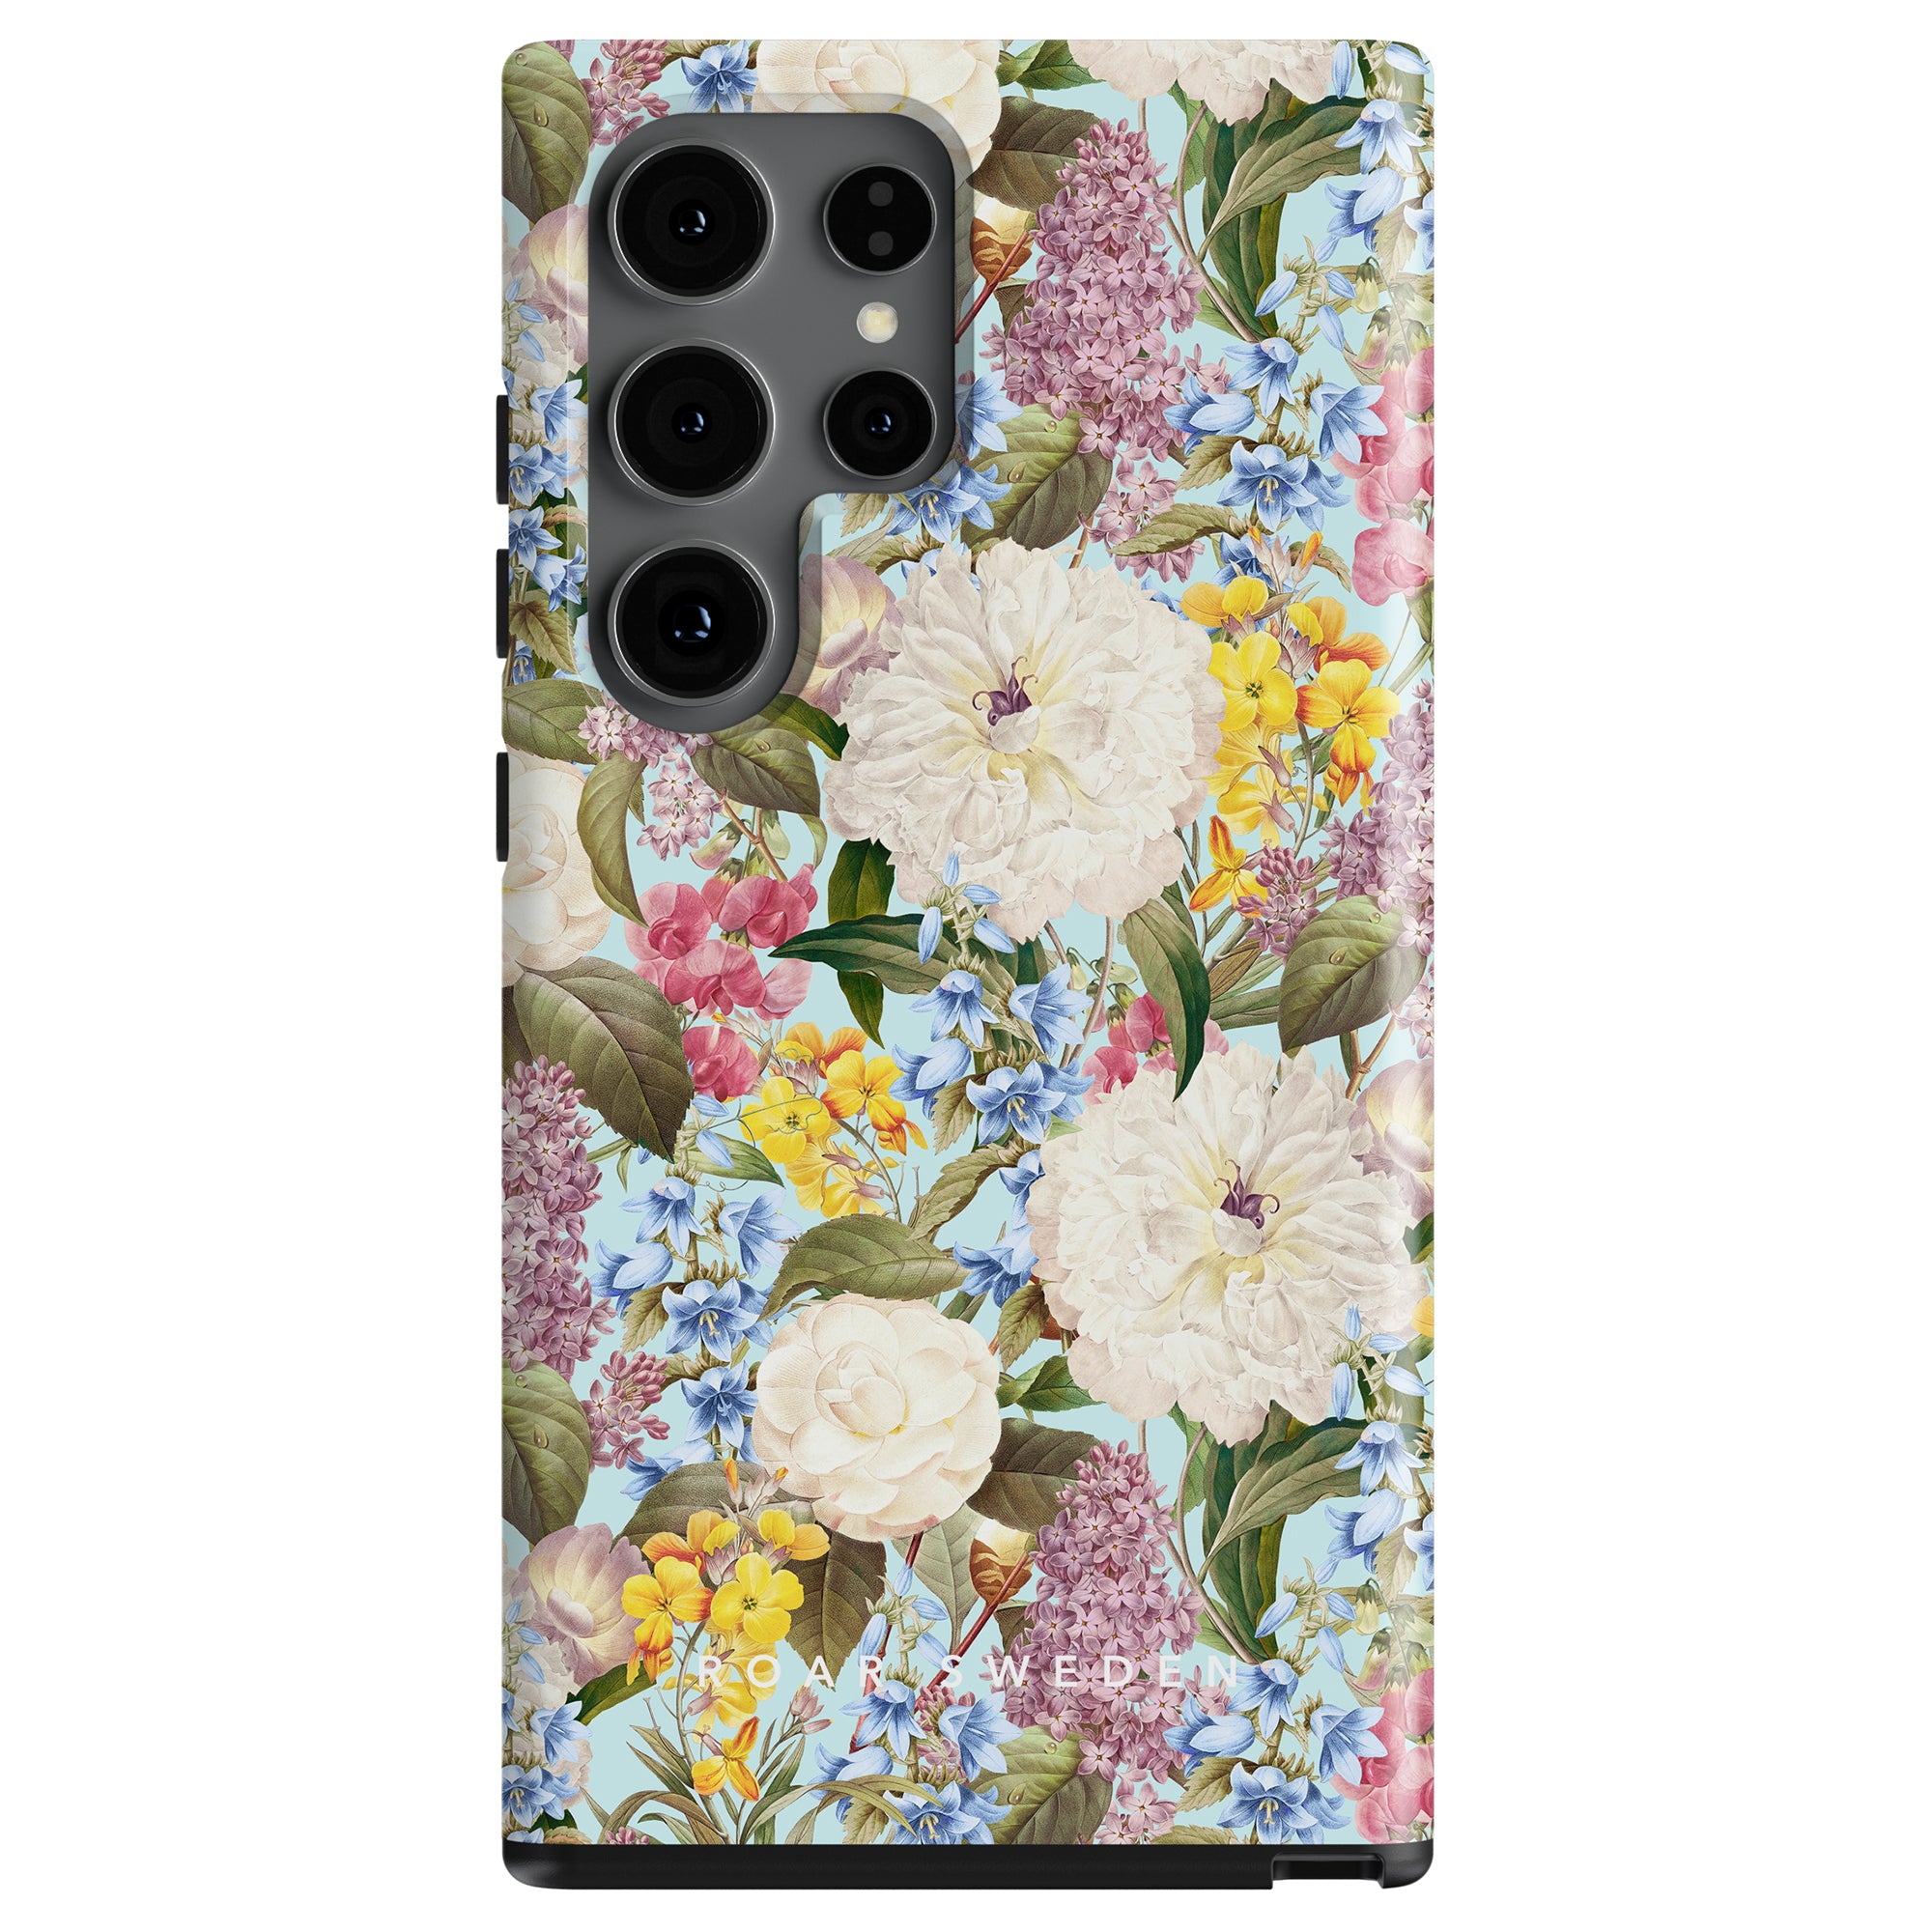 A smartphone with a Fragrant Paradise - Tough Case design featuring a mix of colorful flowers.